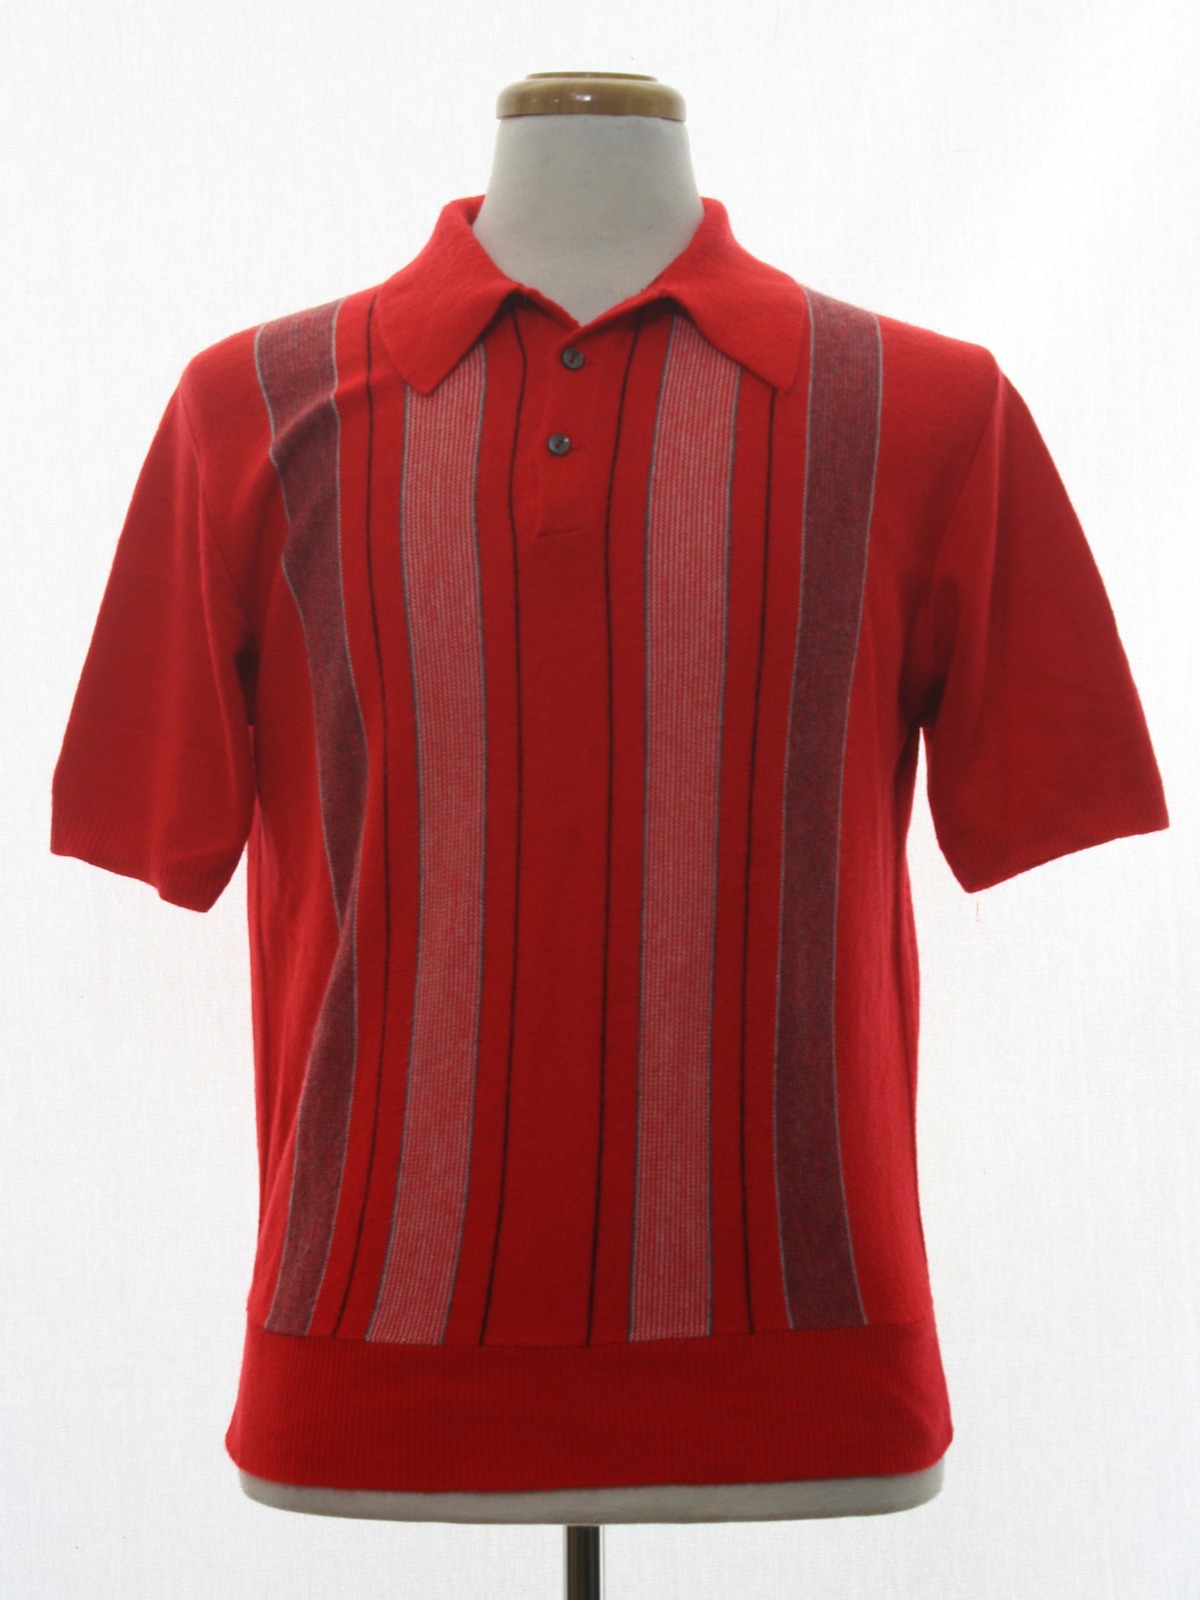 50s Retro Knit Shirt: Late 50s -No Label- Mens red background, black ...